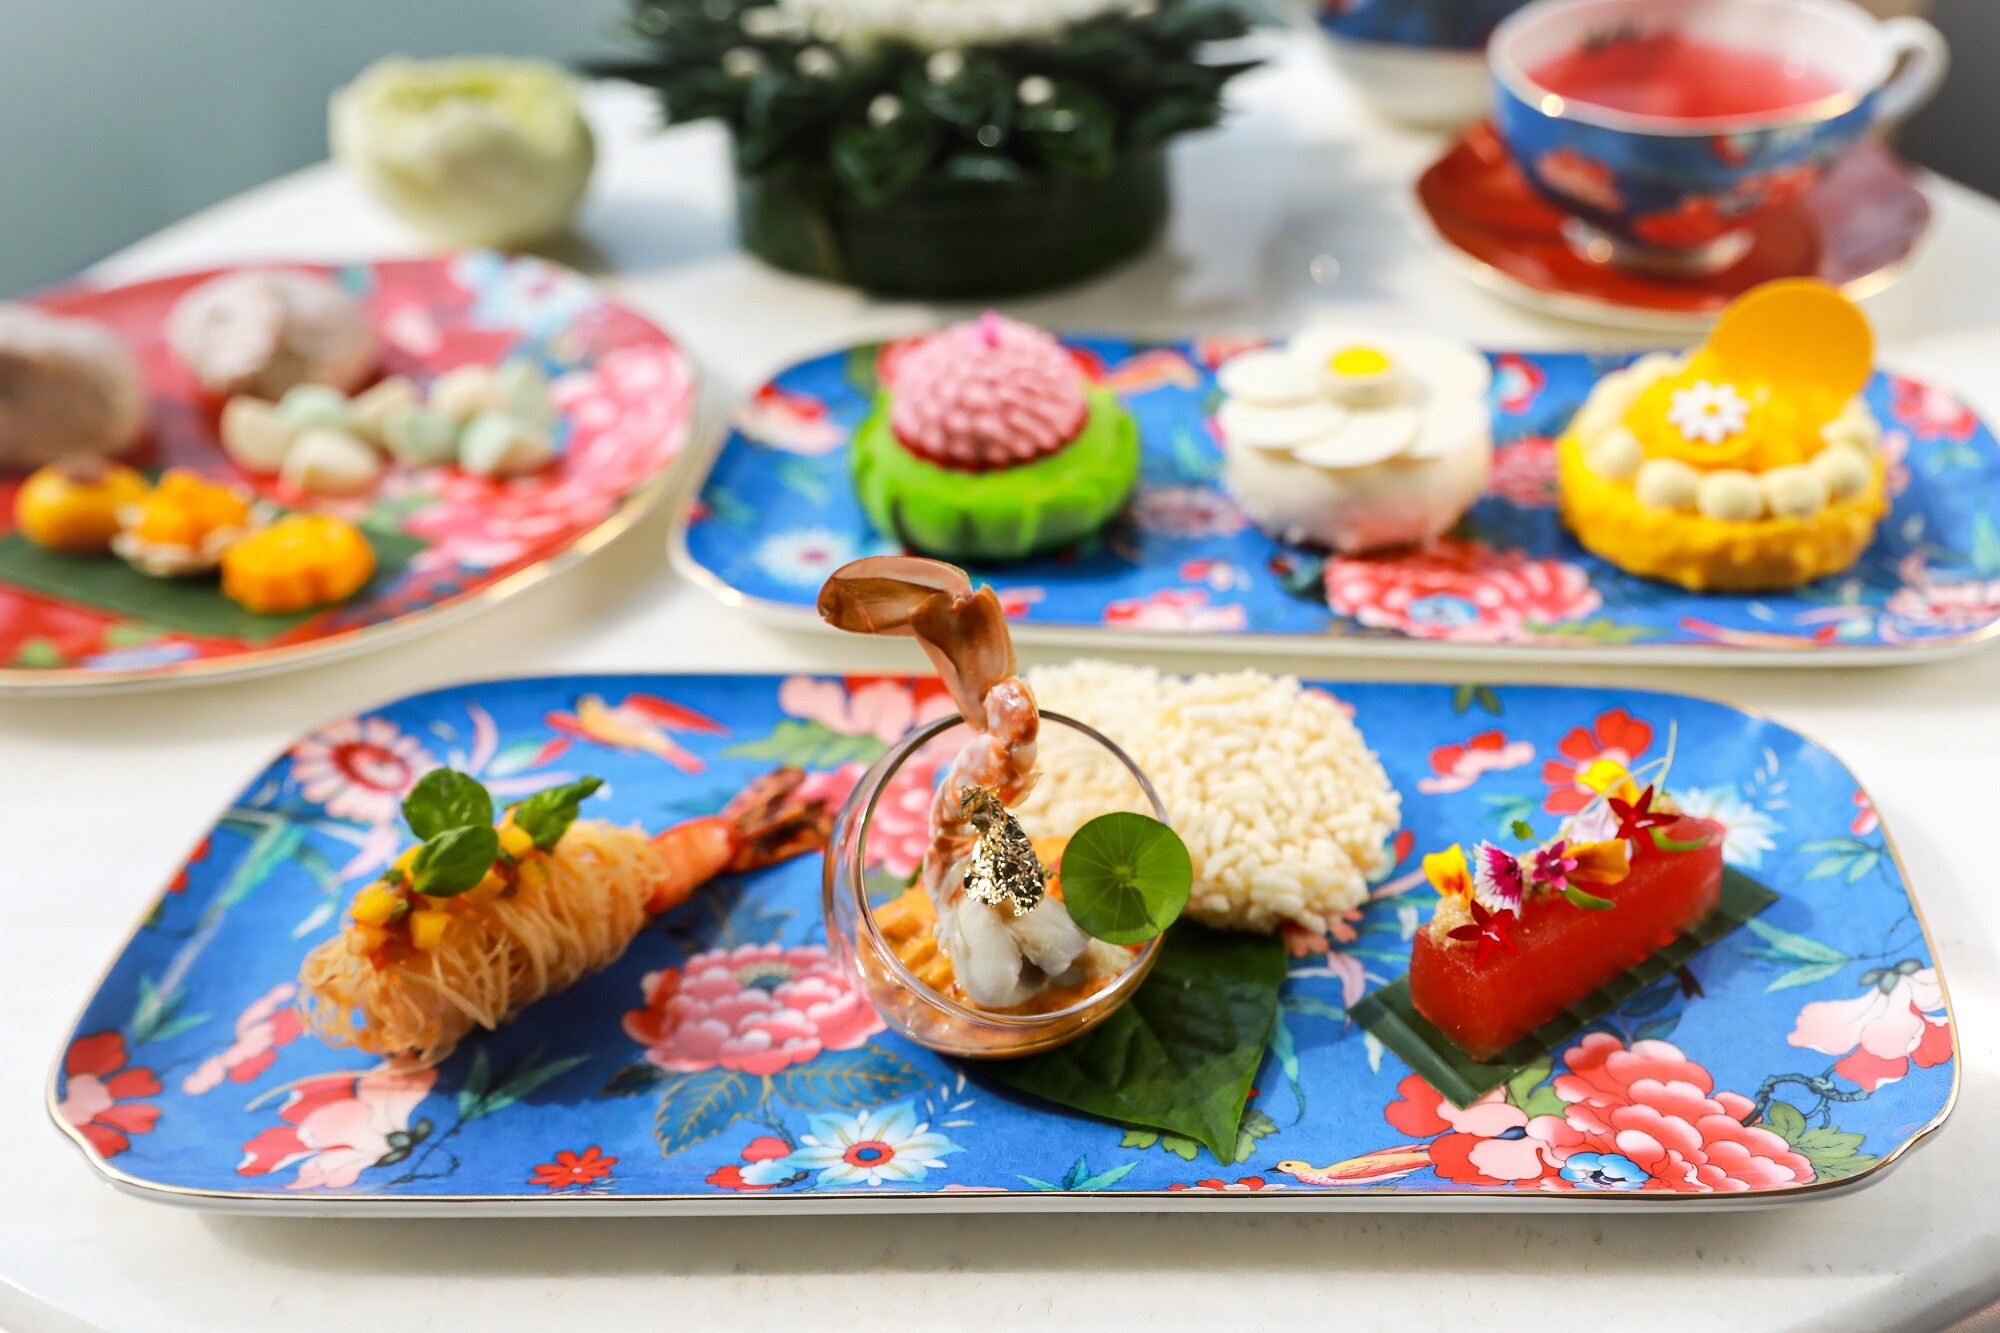 Celebrate the timeless traditions of Asian tea culture and handcrafted delicacies on Loy Krathong Day at Capella Bangkok